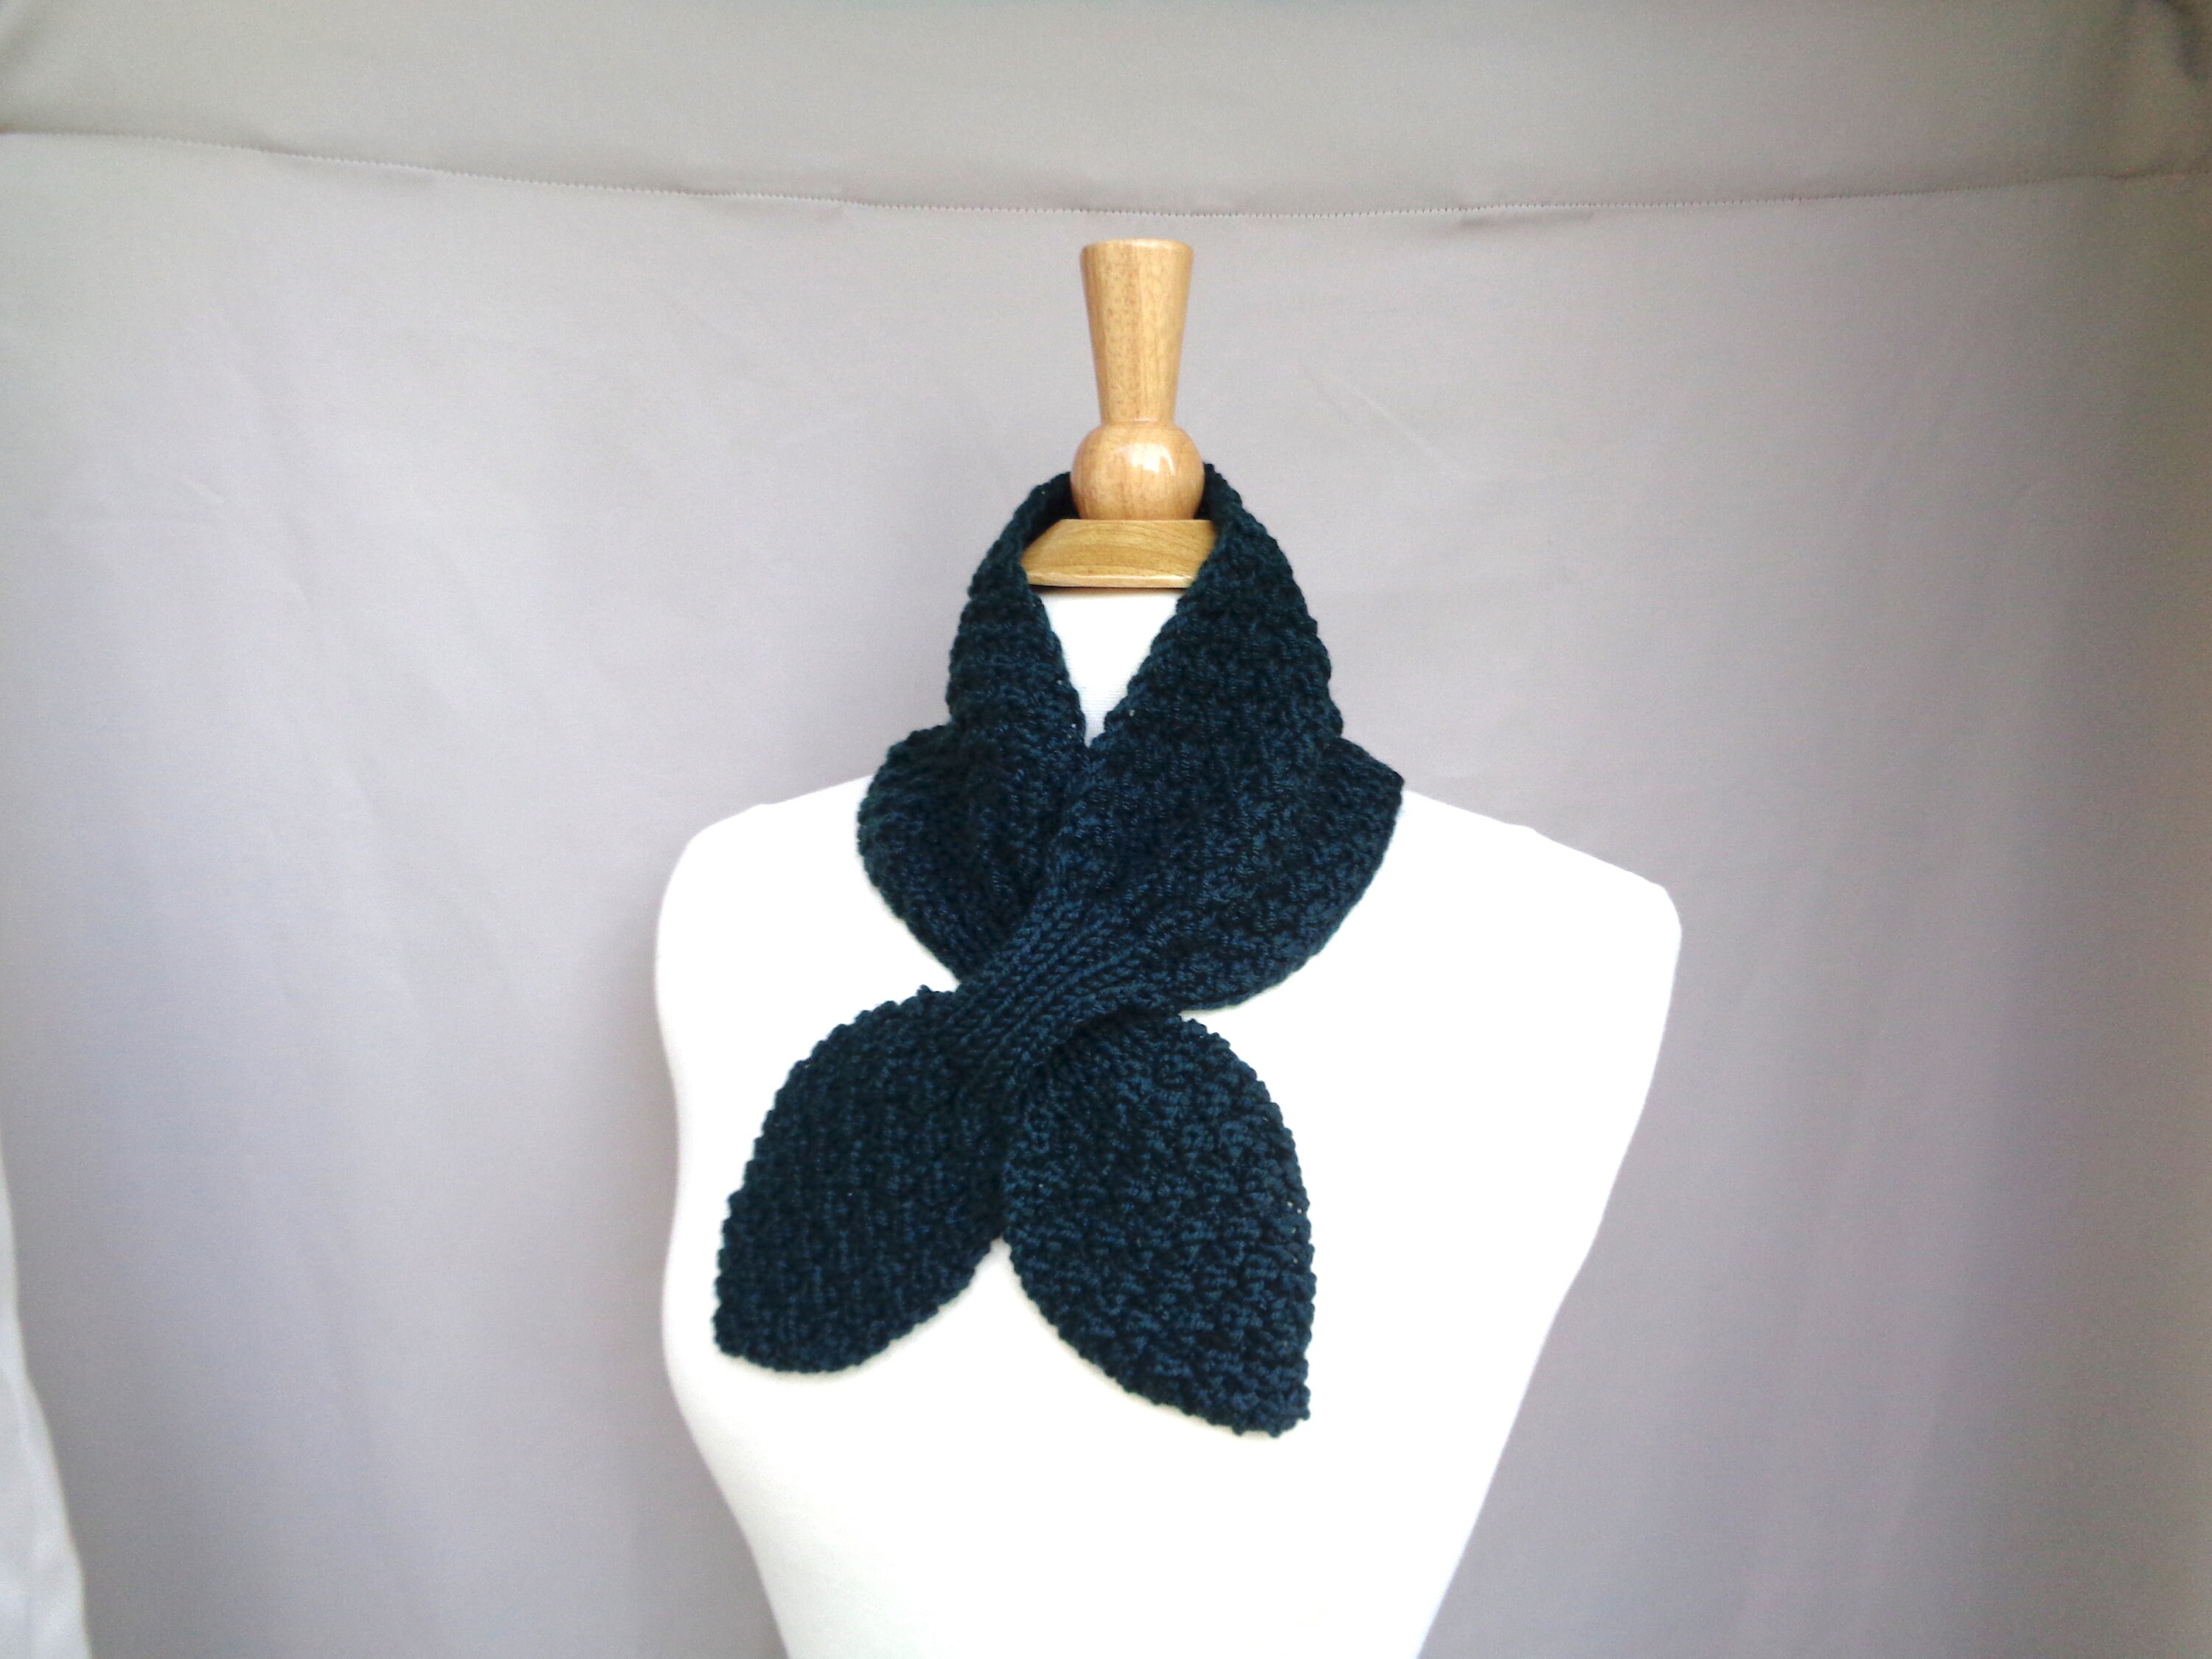 Forest Green Ascot Scarf, Cashmere Blend, Pull Through Scarflette, Neck Warmer, Merino Wool, Hand Knit Scarf